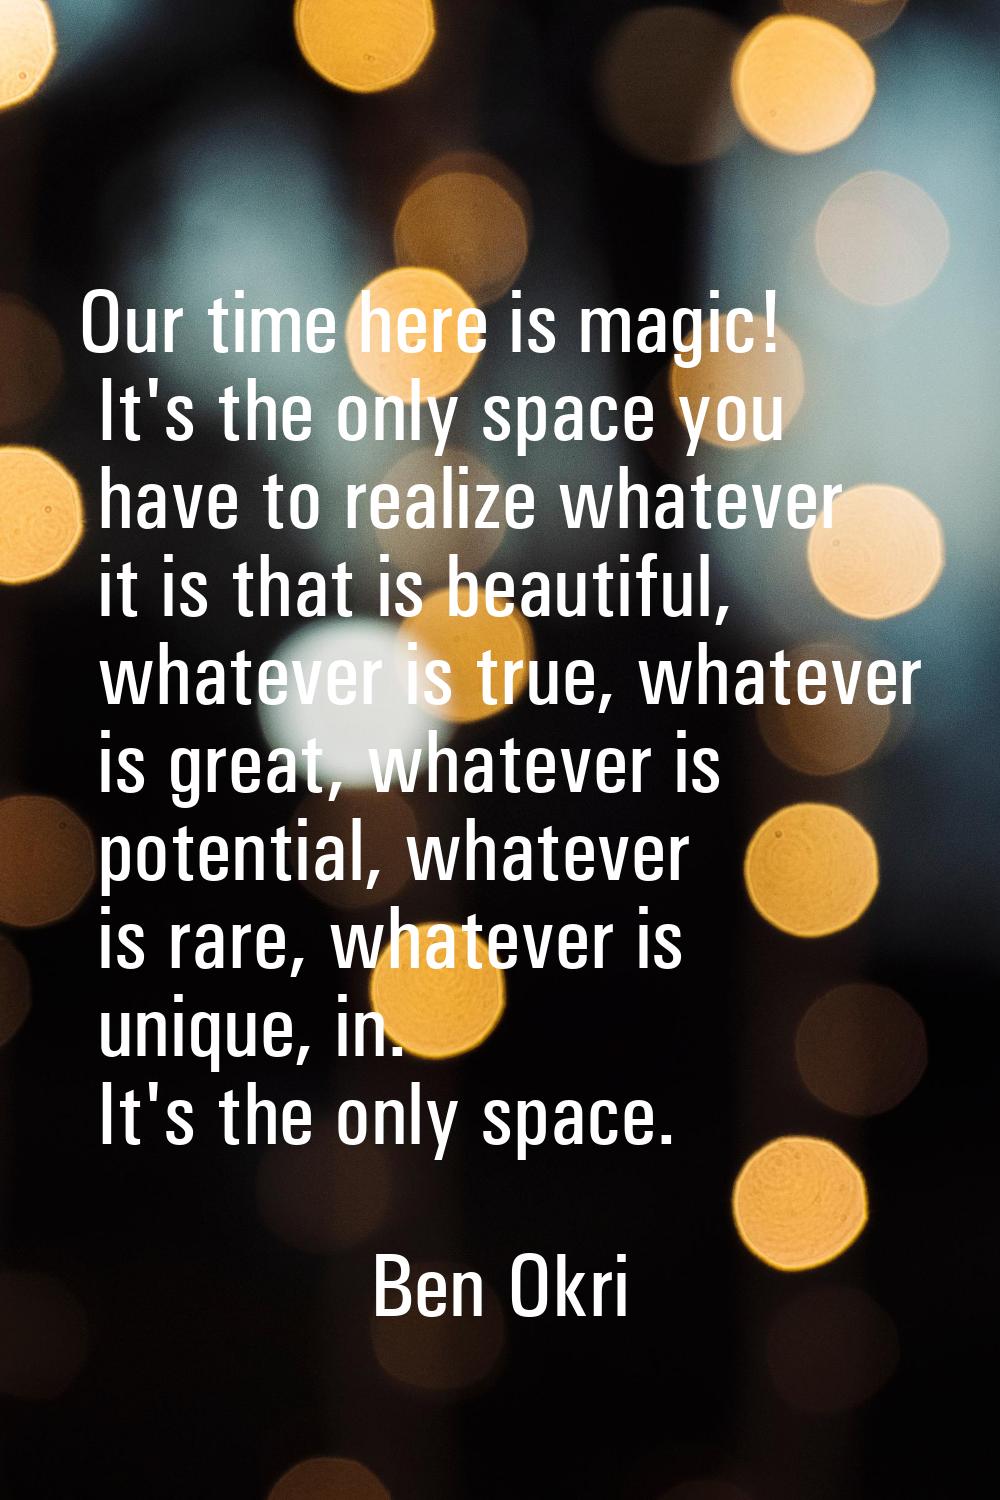 Our time here is magic! It's the only space you have to realize whatever it is that is beautiful, w